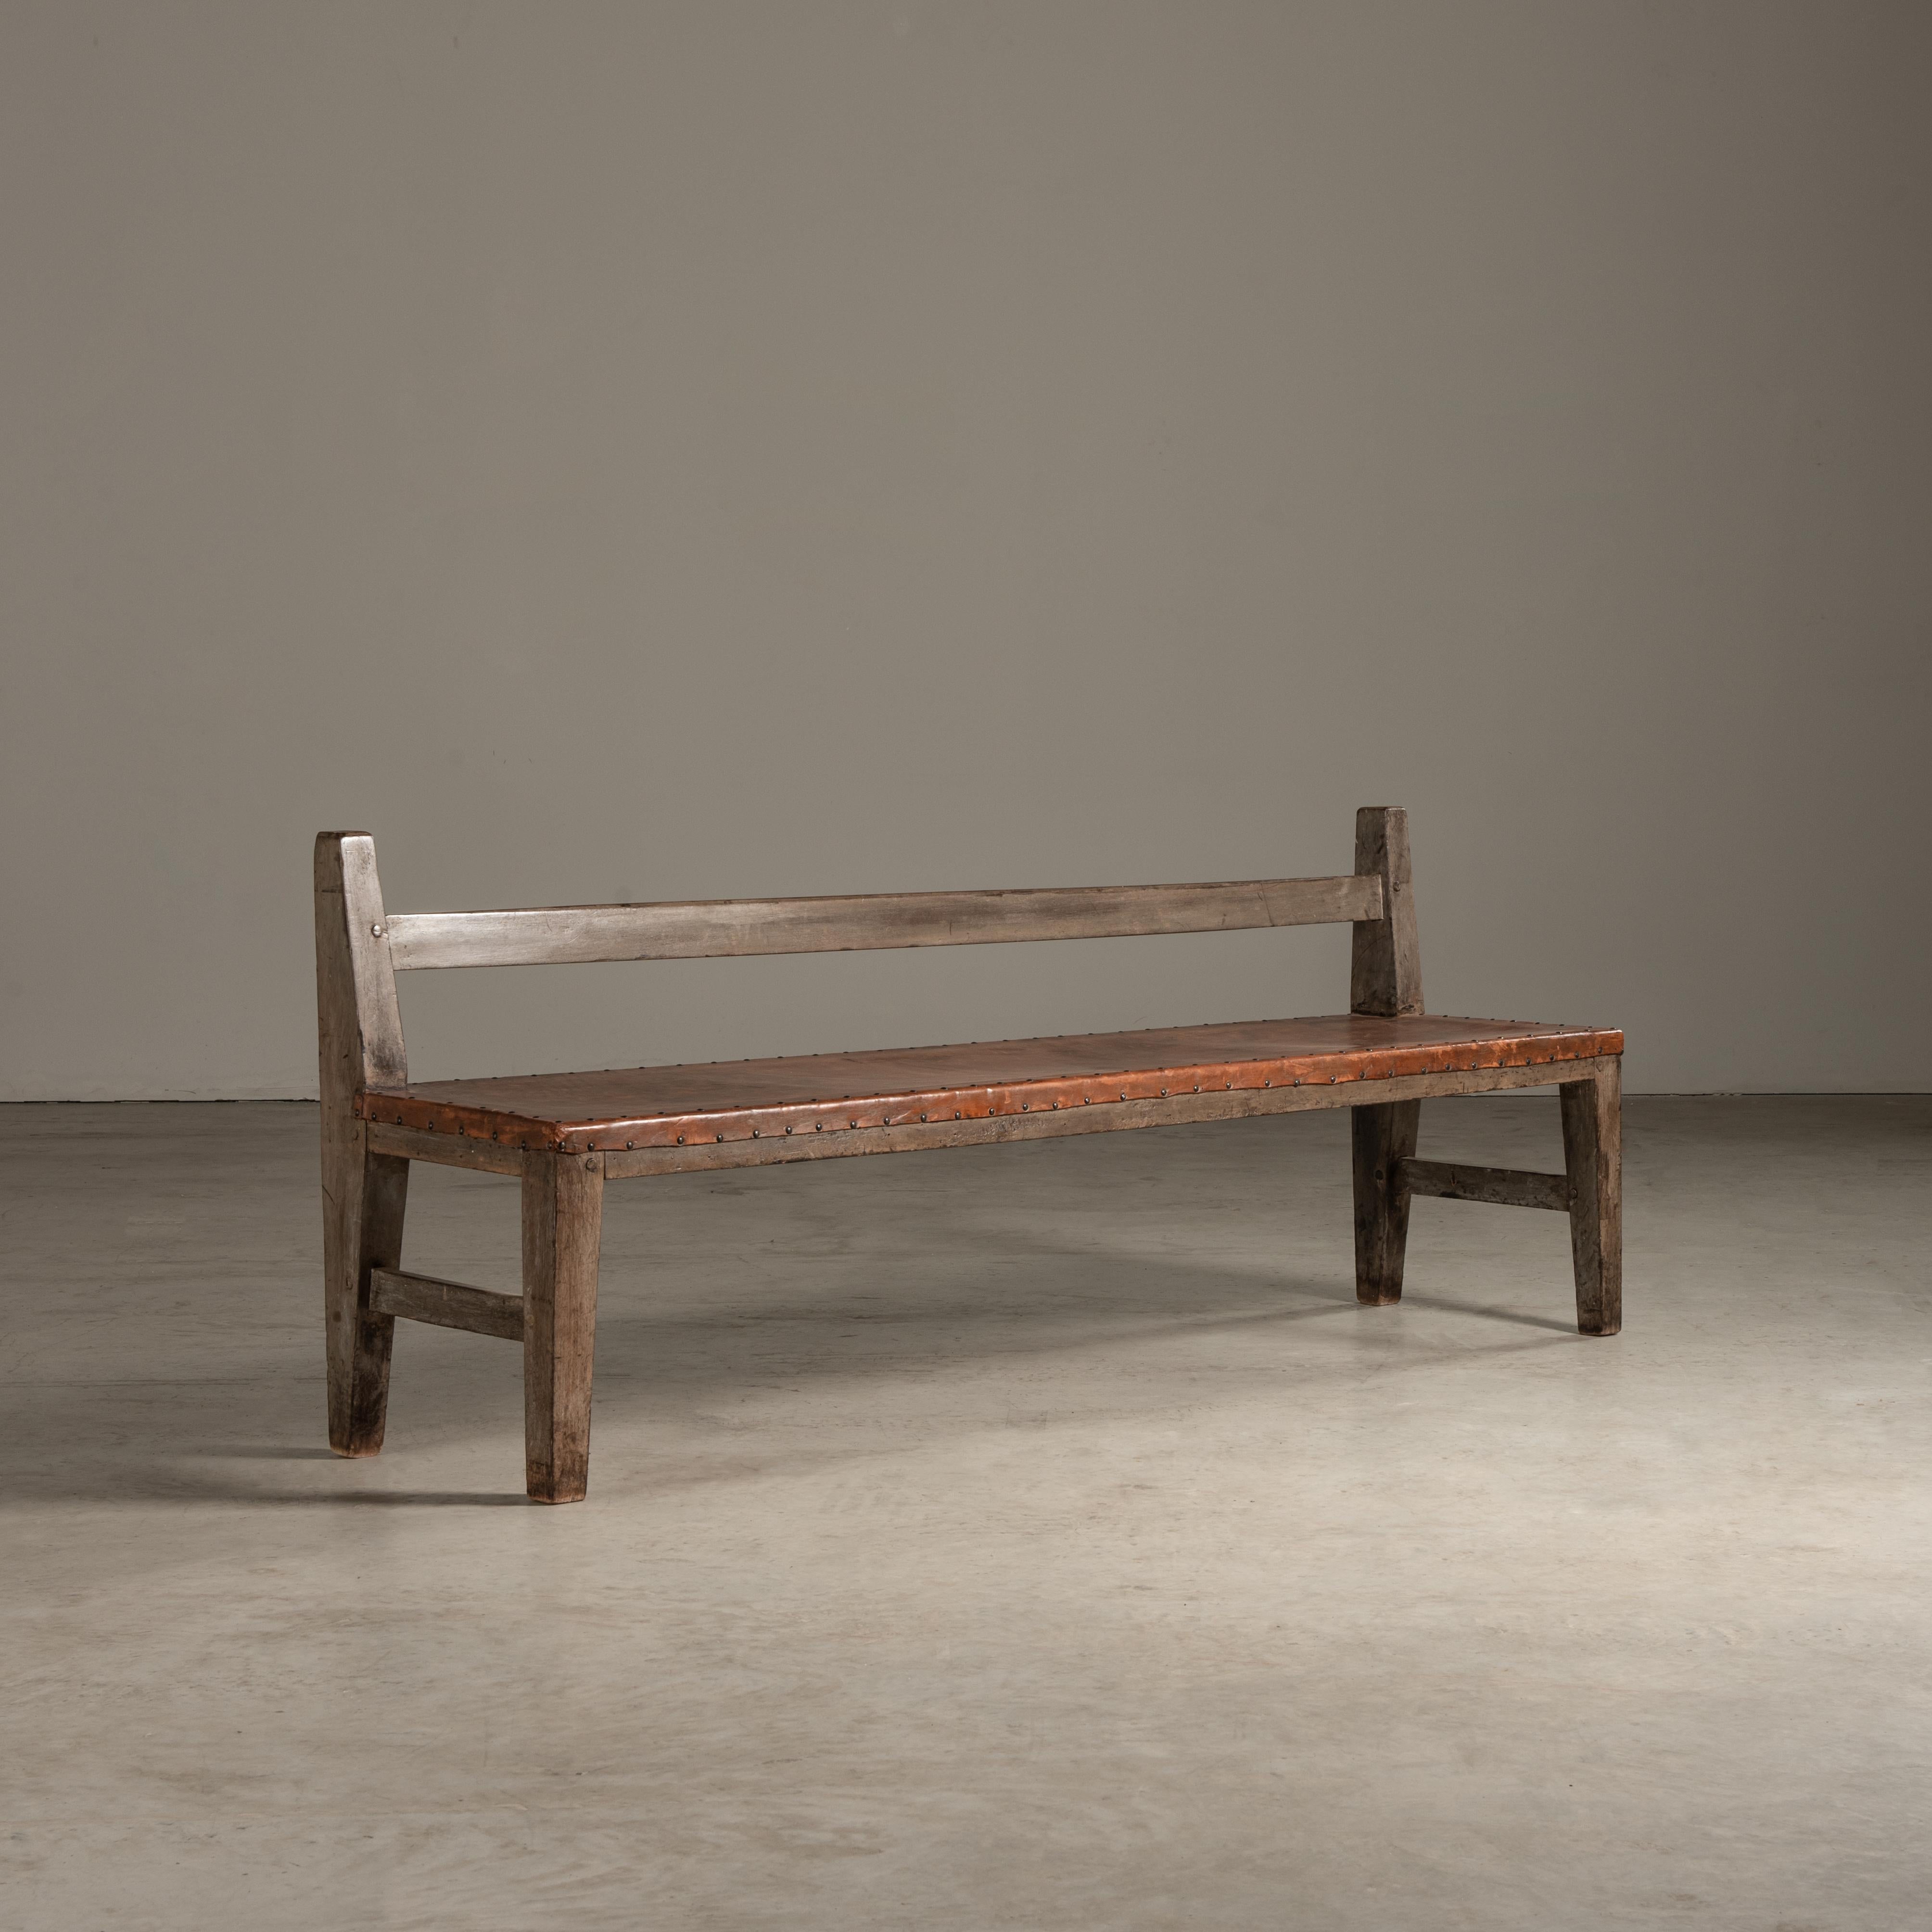 The bench showcased here is a splendid example of Brazilian vernacular design from the 19th century. It is a testament to the timeless beauty of simple, functional design that transcends eras. The bench is crafted from solid wood, which has